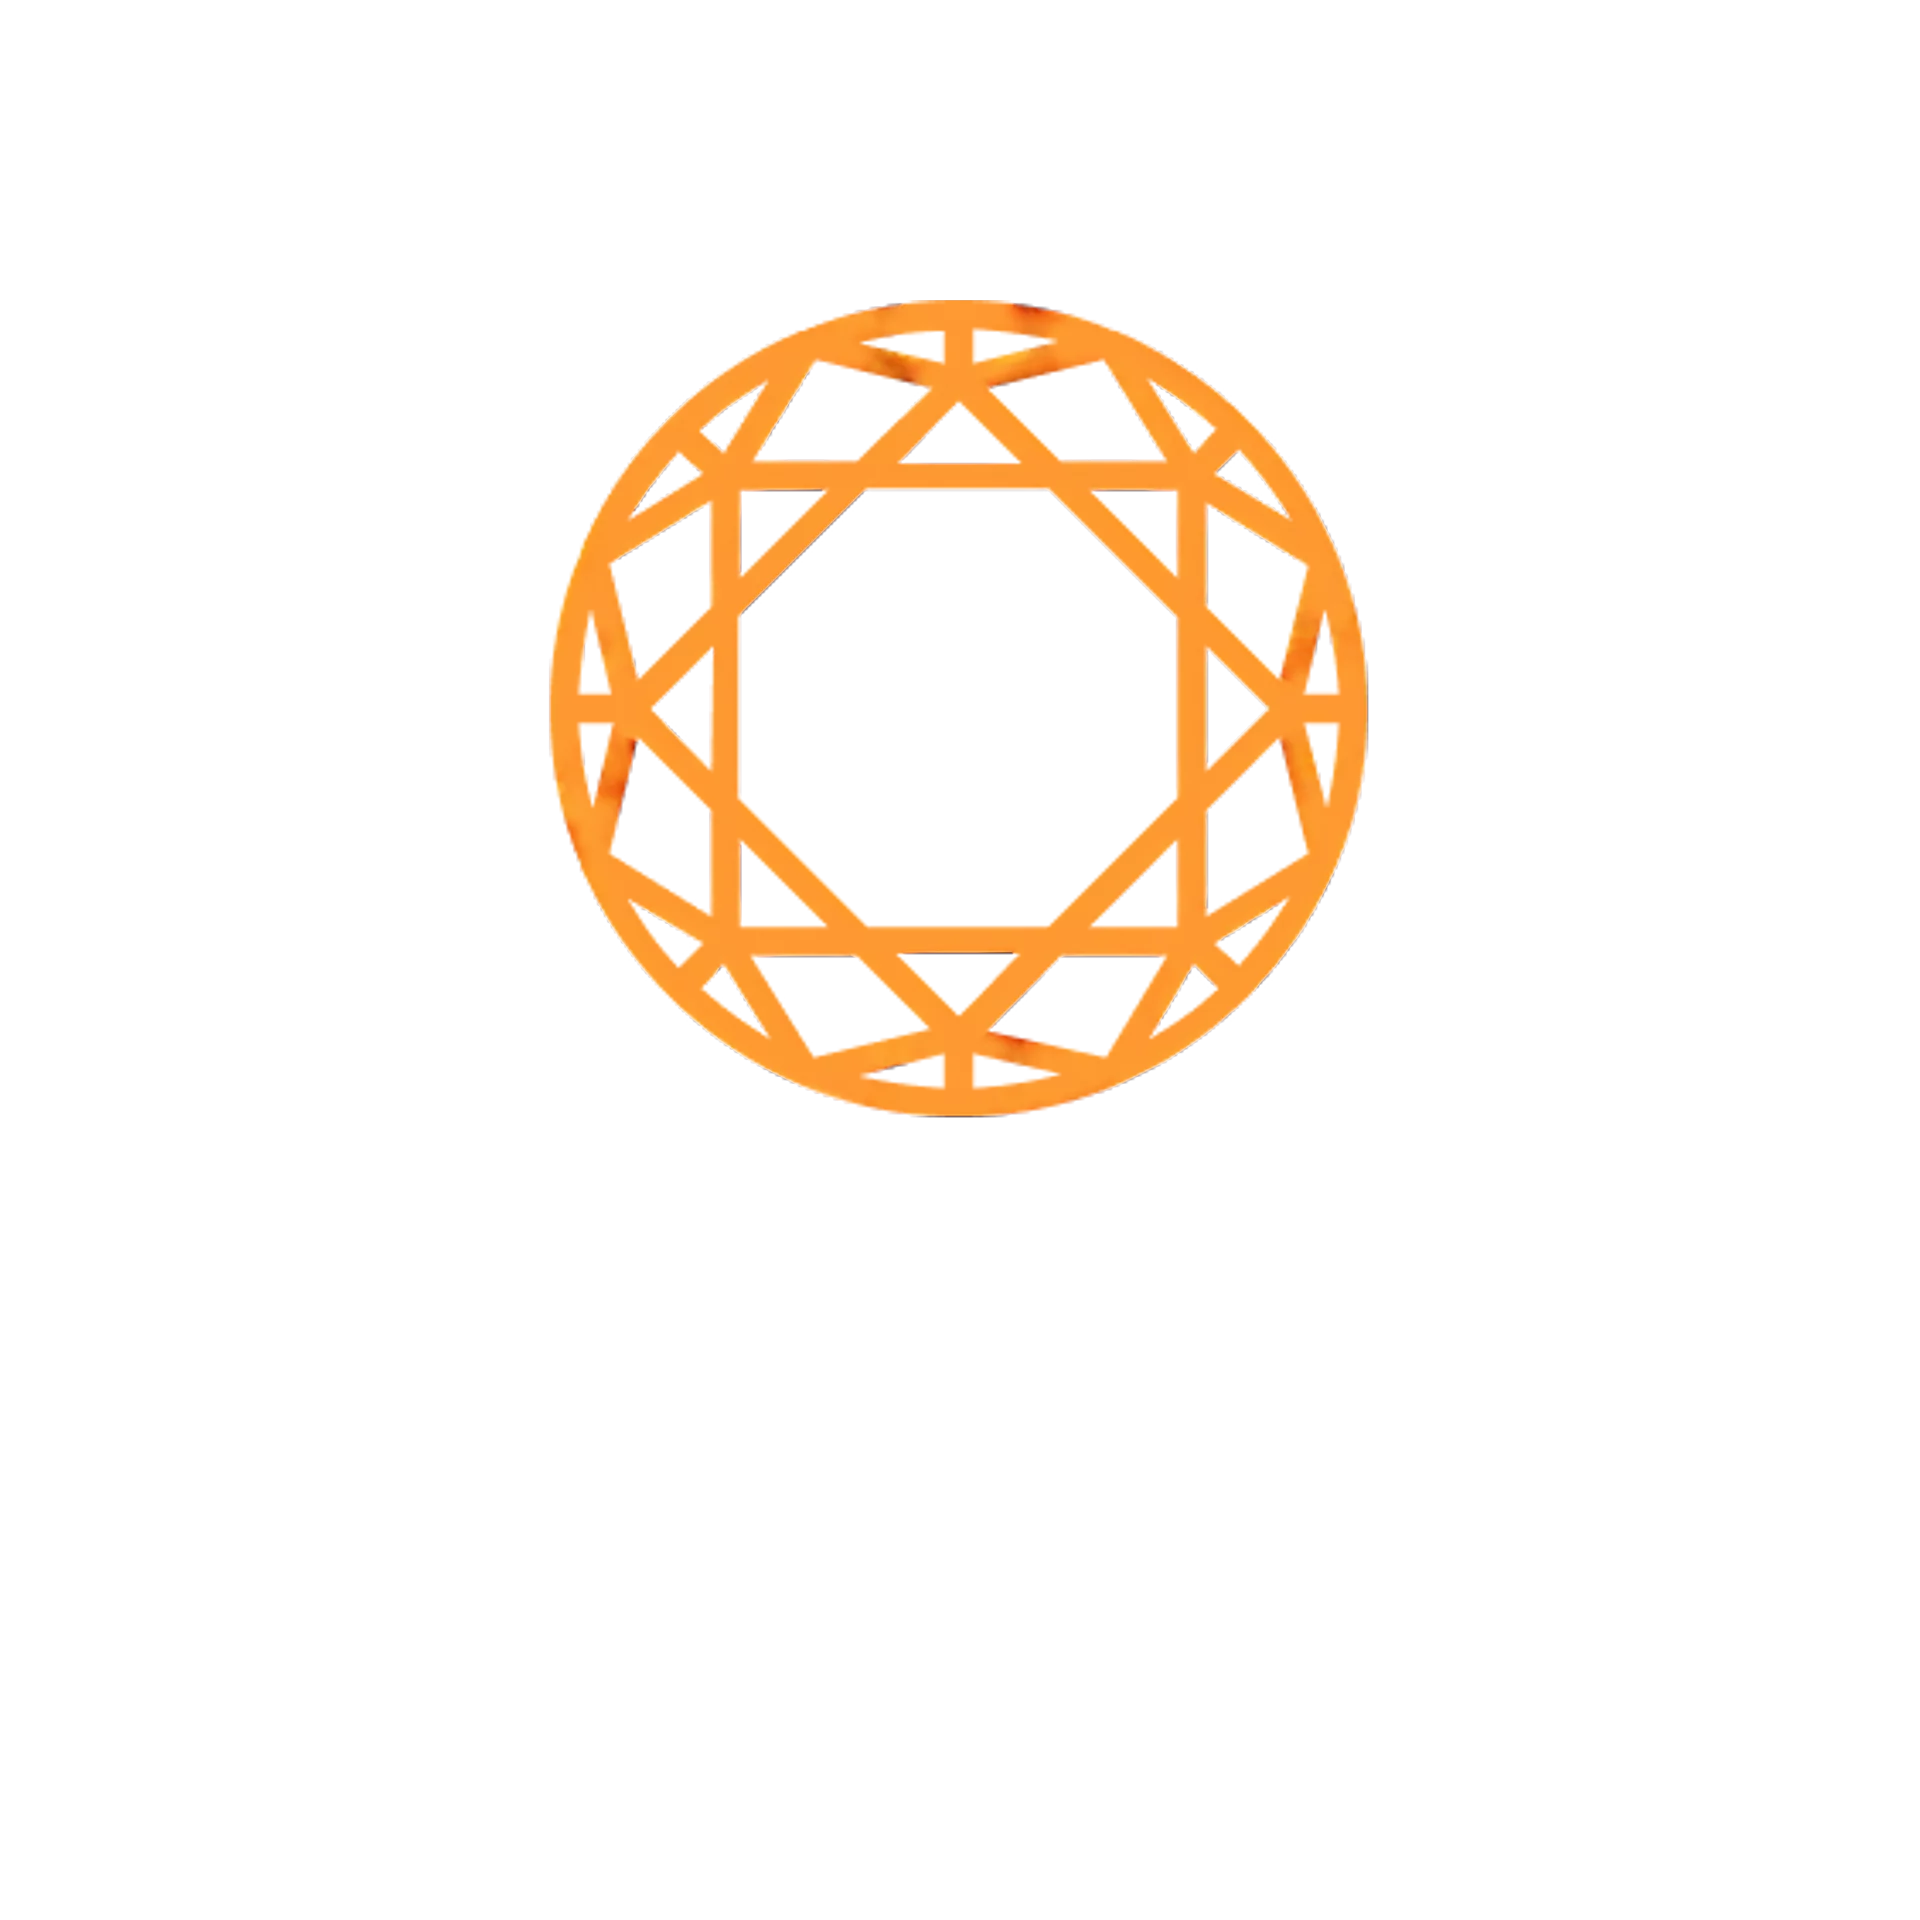 Register at Pure WIn and get bonuses on betting.